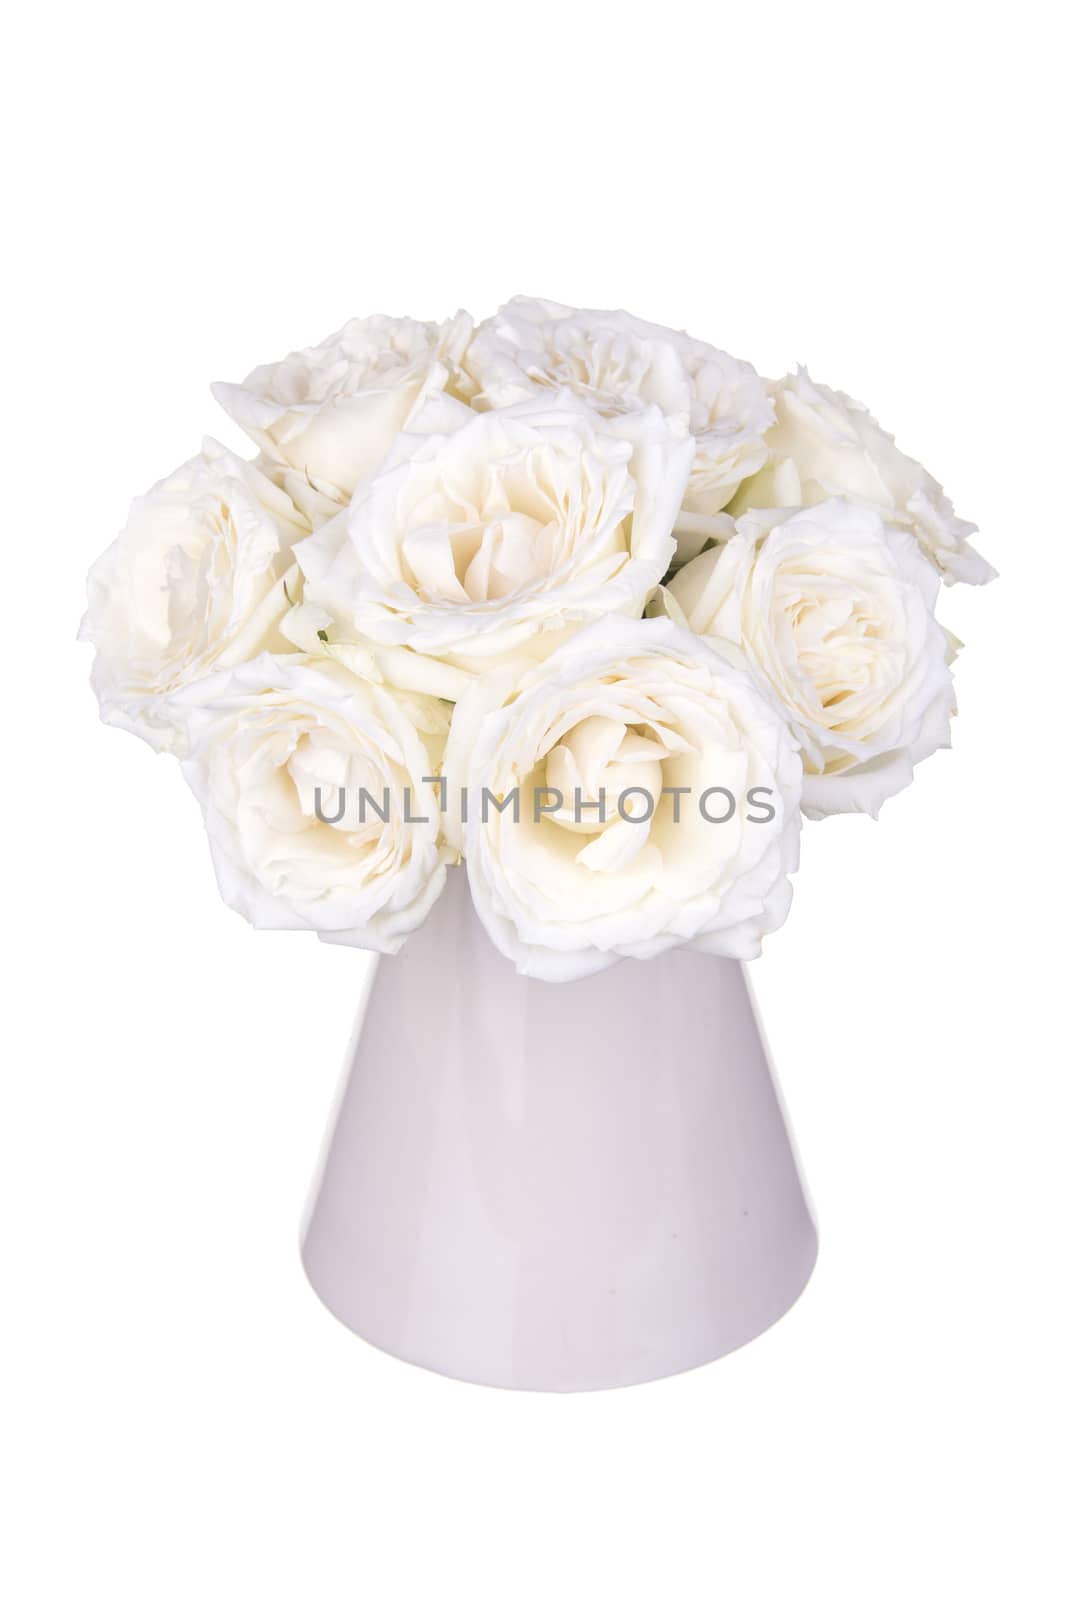 Roses in a vase isolated on white background.